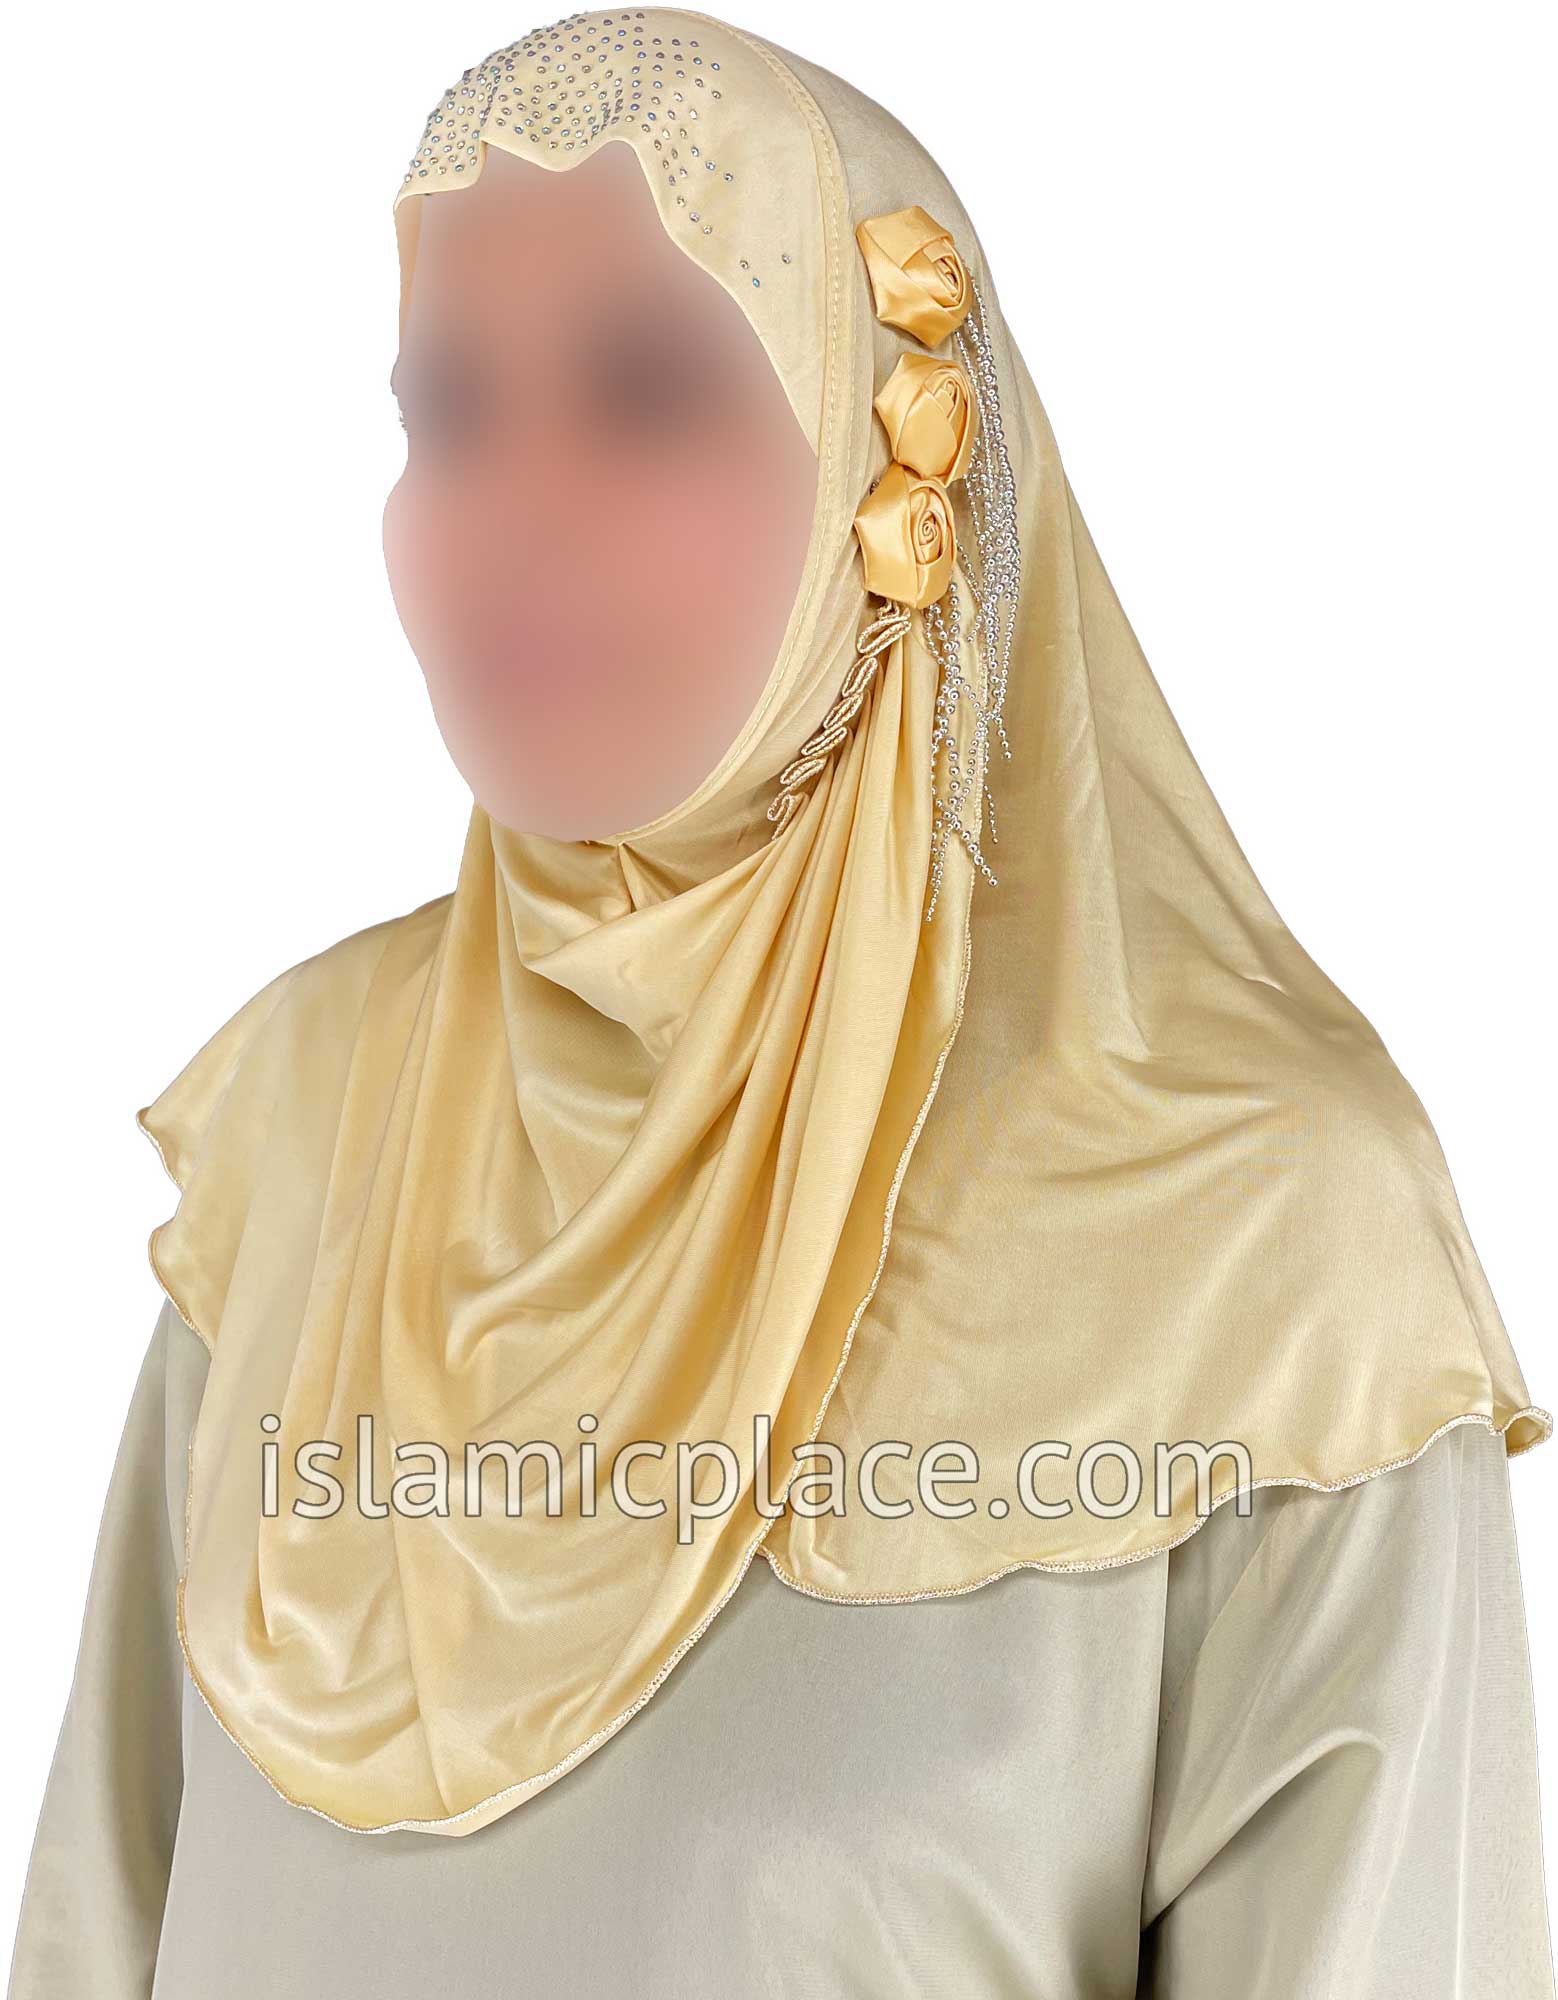 Oatmeal - Roses in a Row Teen to Adult (Large) Hijab Al-Amira (1-piece style) - Design 11